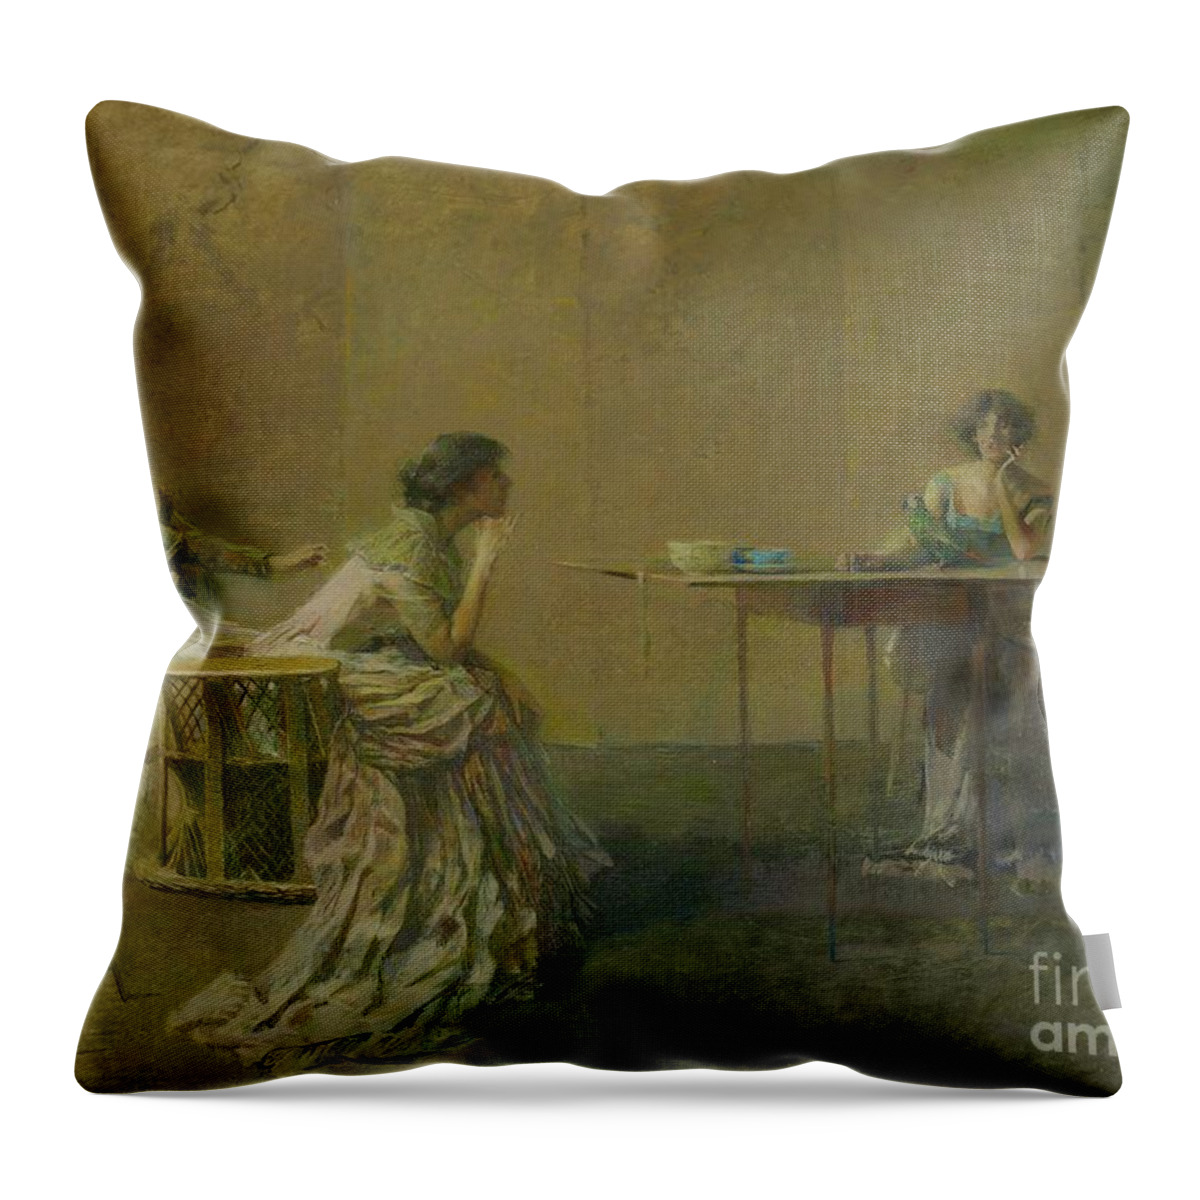 Chatting Throw Pillow featuring the painting The Gossip, C.1907 by Thomas Wilmer Dewing